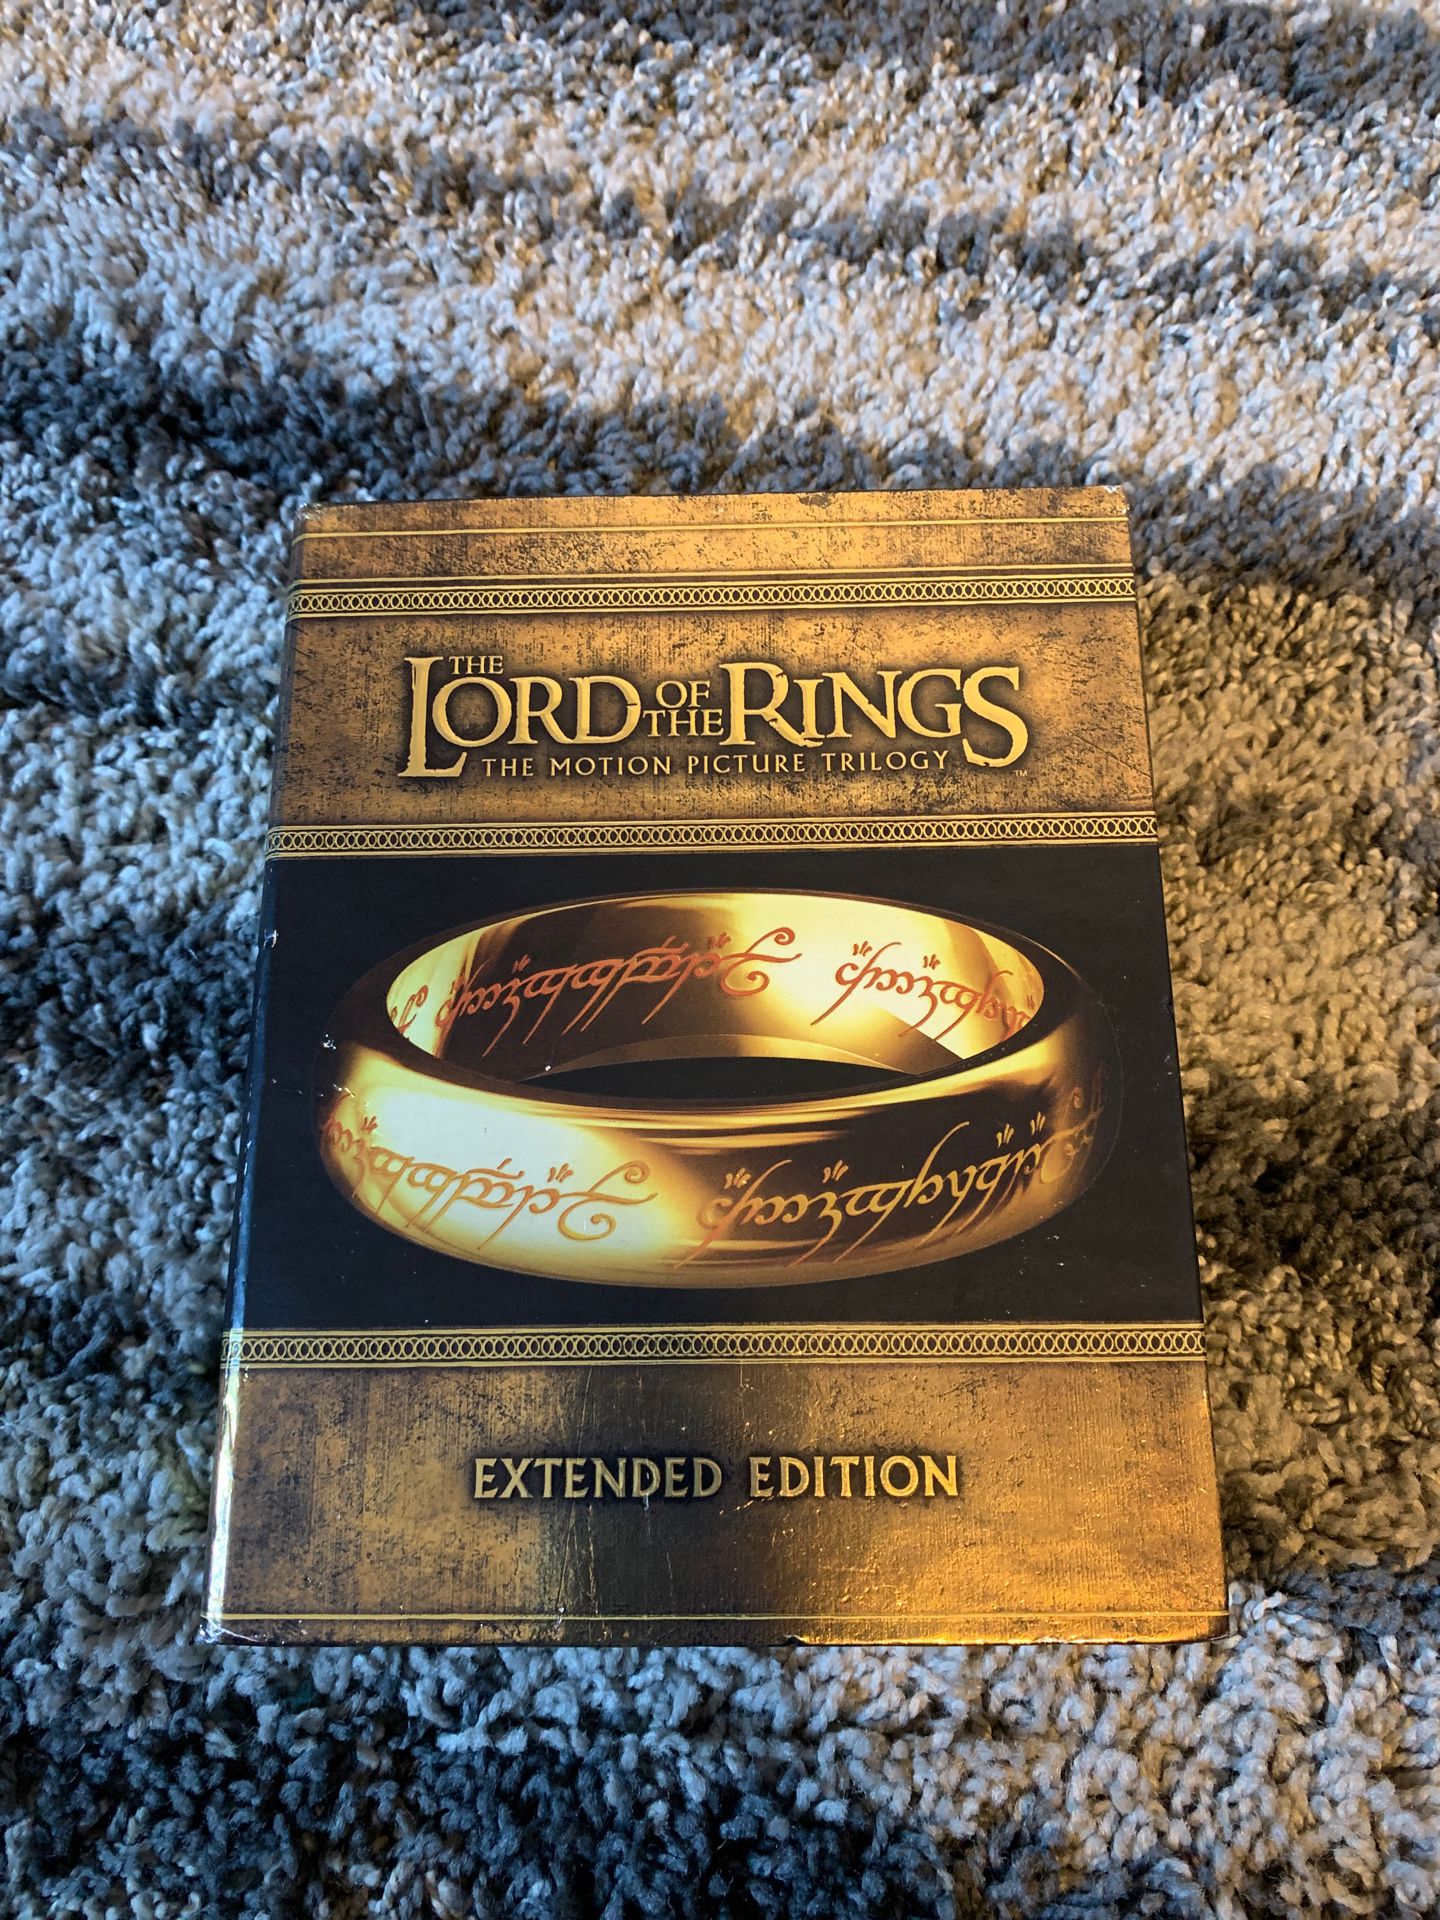 The lord of the rings trilogy extended edition Blu-ray